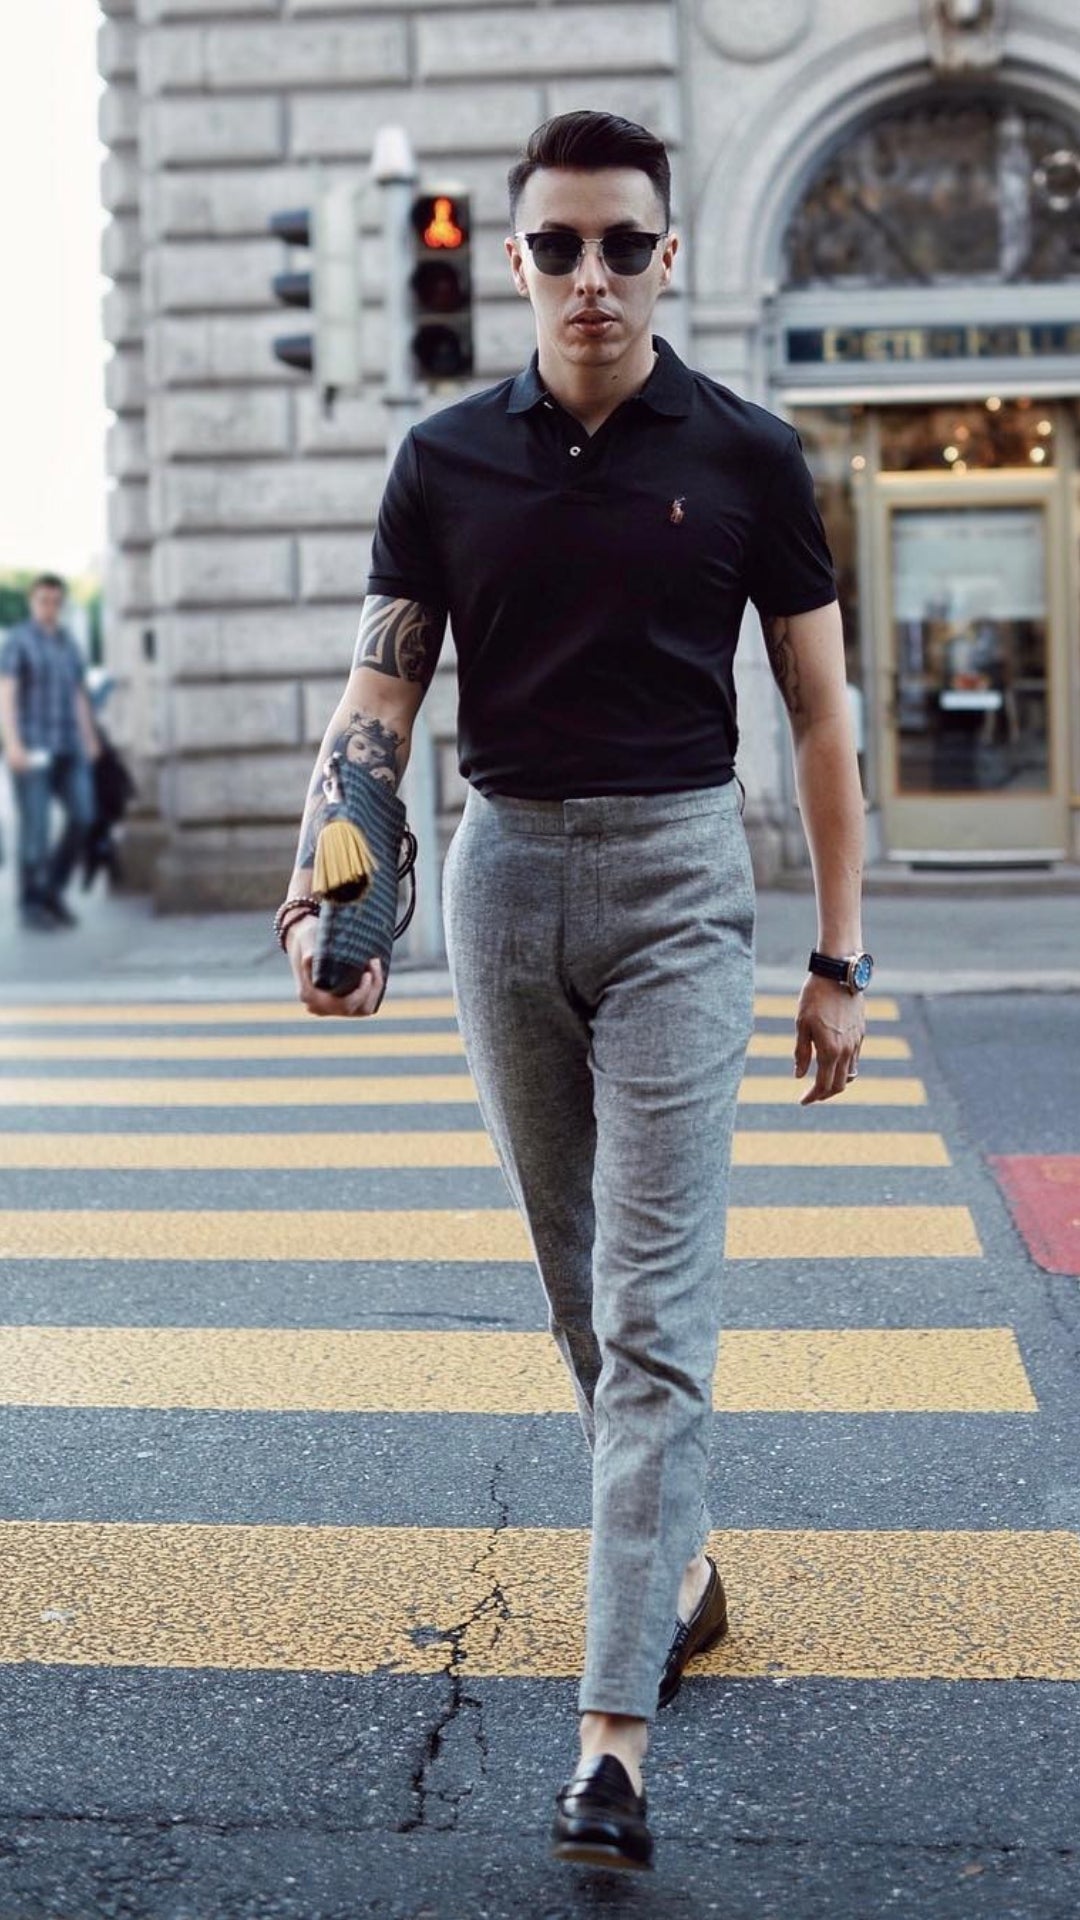 Simple outfits for men. #simple #outfits #mensfashion #streetstyle